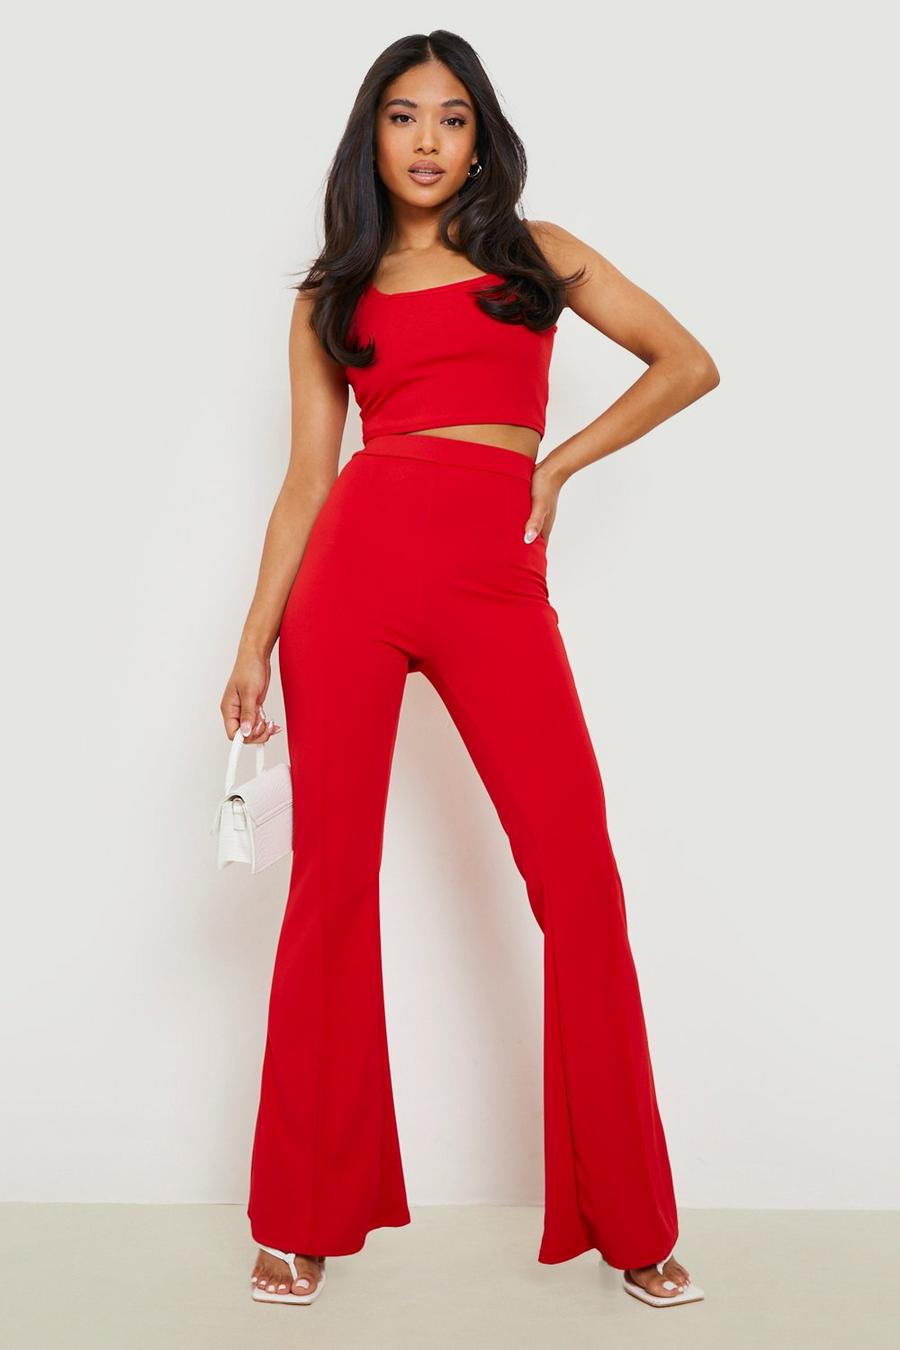 Women's Petite Crop Top And Seam Detail Flared Co-ord | Boohoo UK